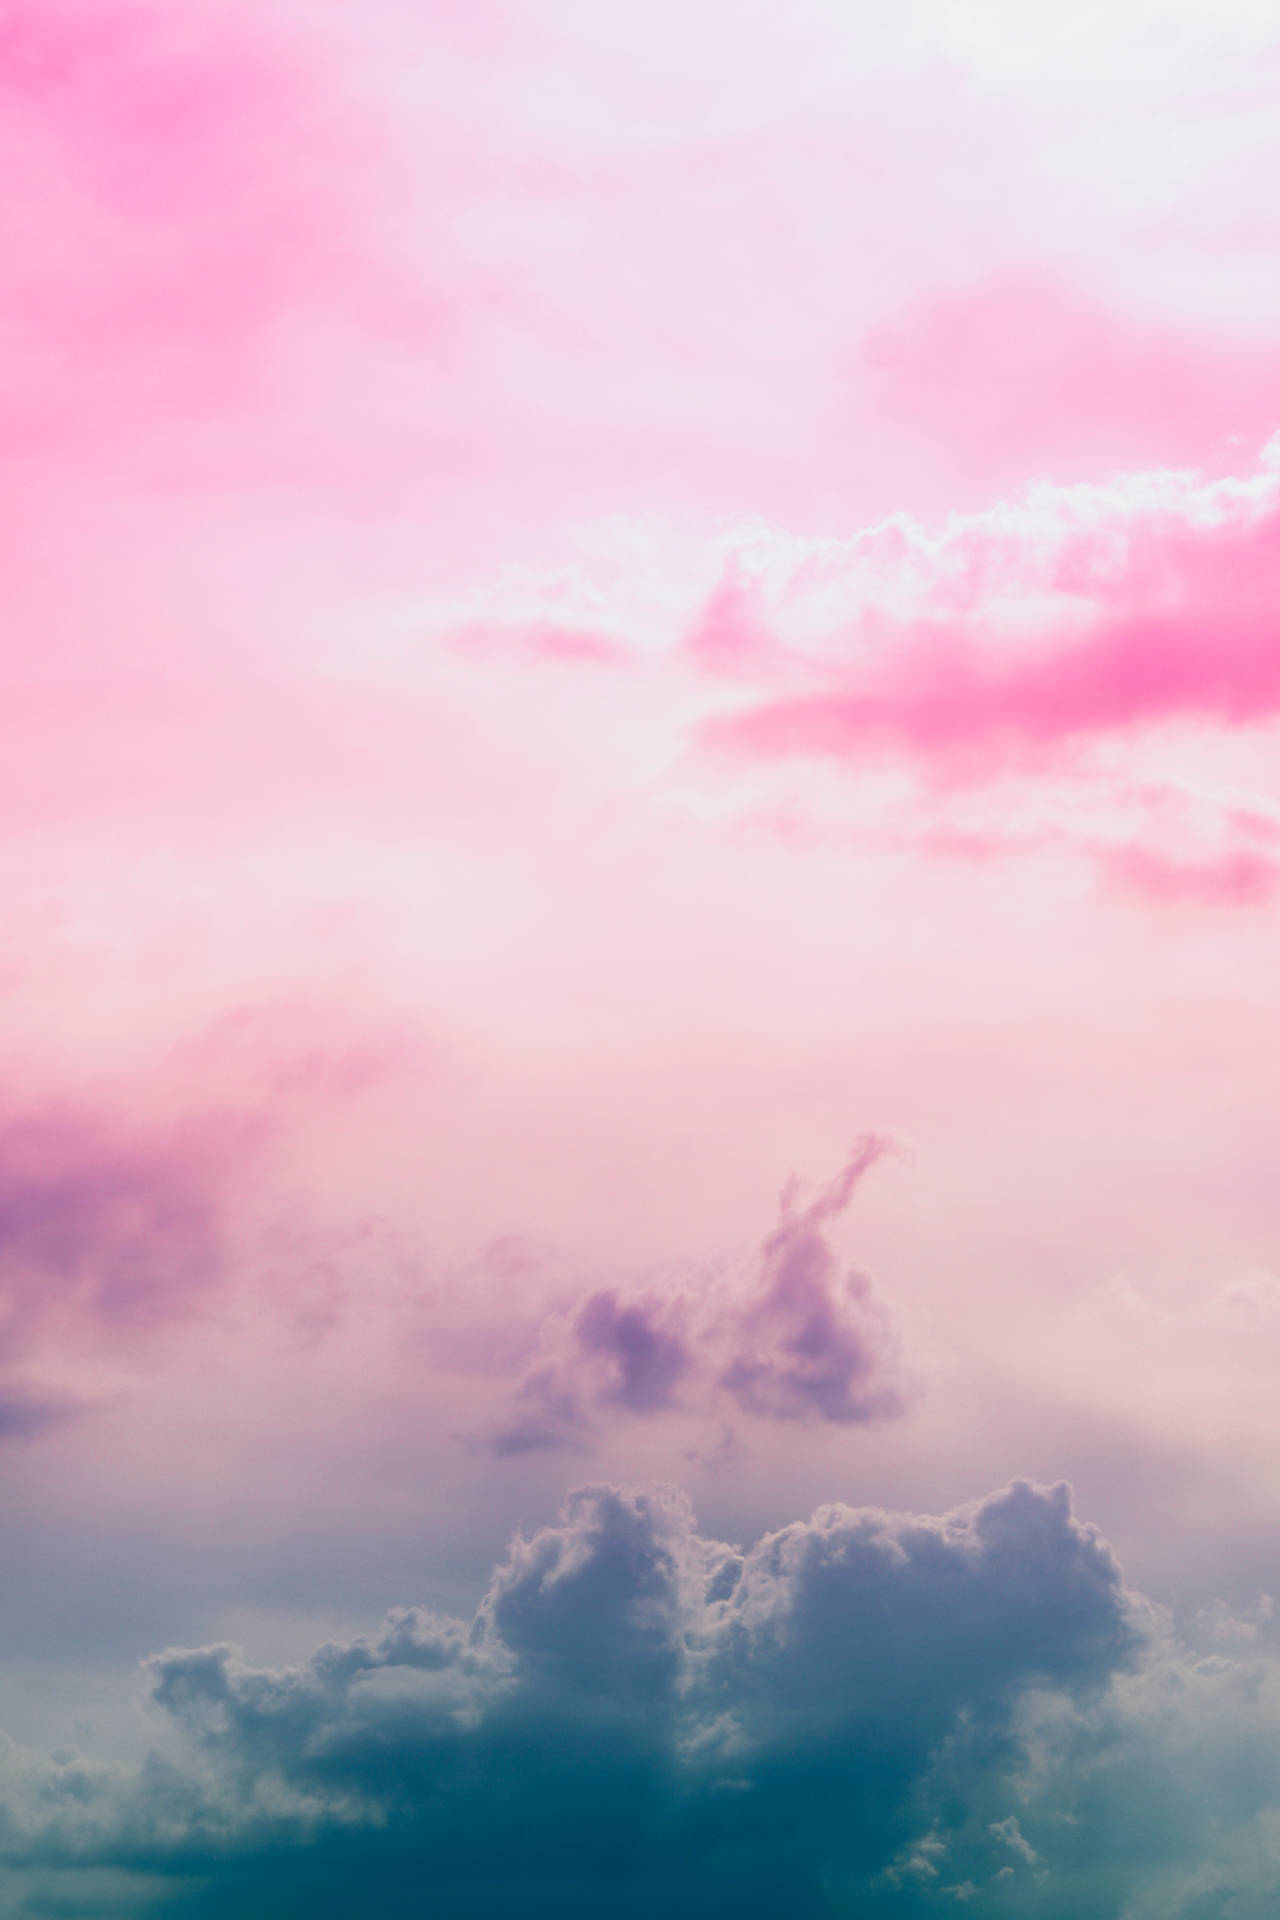 Aesthetic Sky Of Pink And Teal Gradient